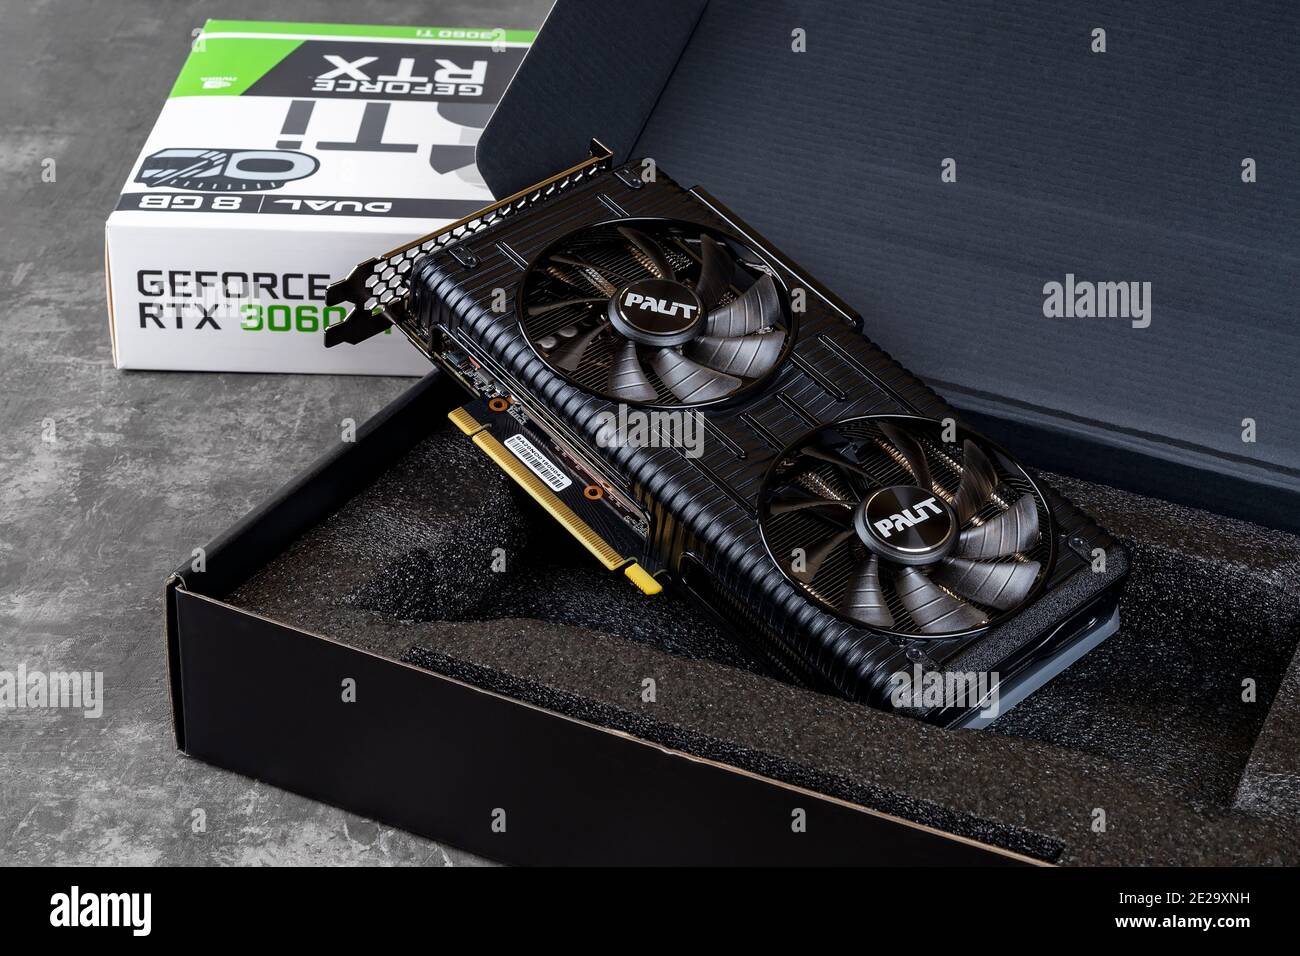 Varna, Bulgaria, January 11, 2021. Palit Nvidia Geforce RTX 3060 Ti Dual OC  gaming graphics card in an open box against dark background Stock Photo -  Alamy